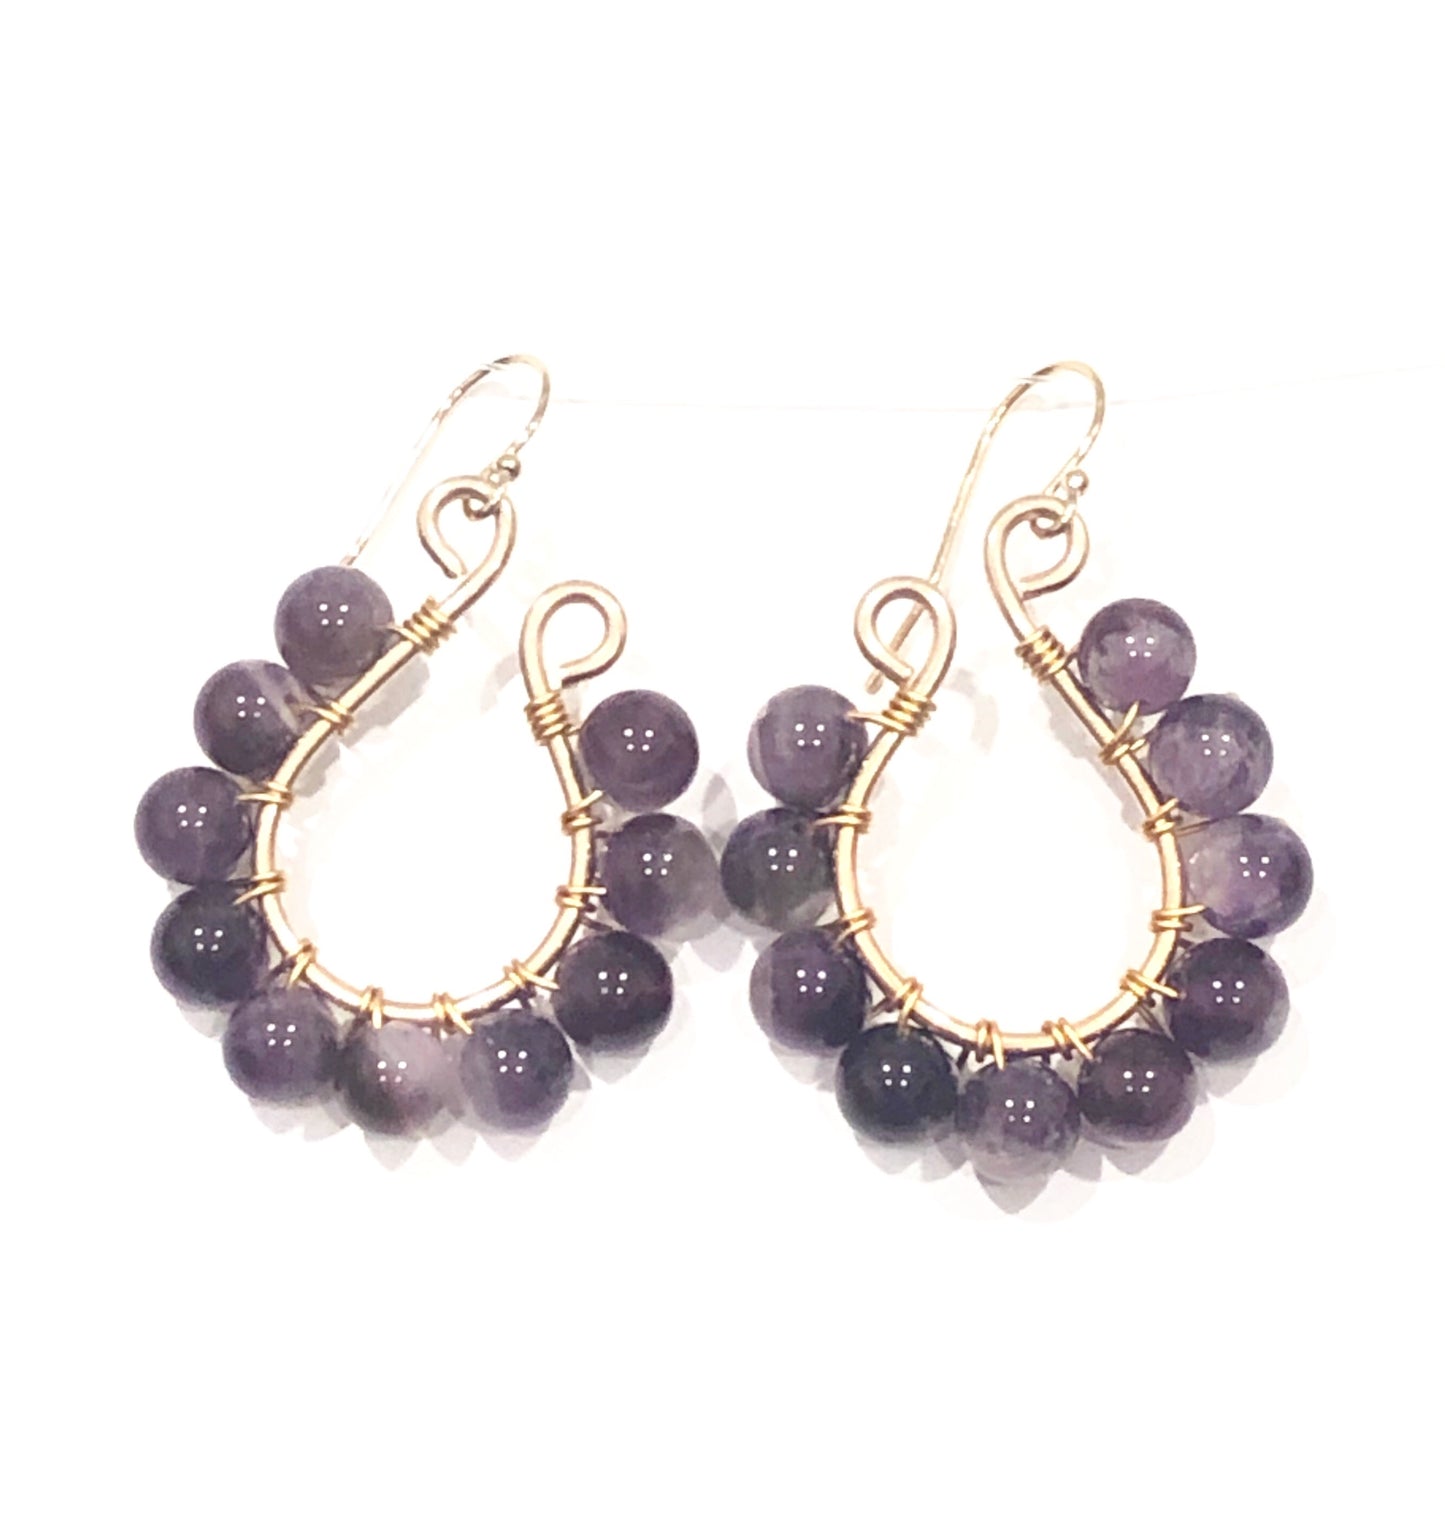  Amethyst and Gold Filled Wire Wrapped Earrings